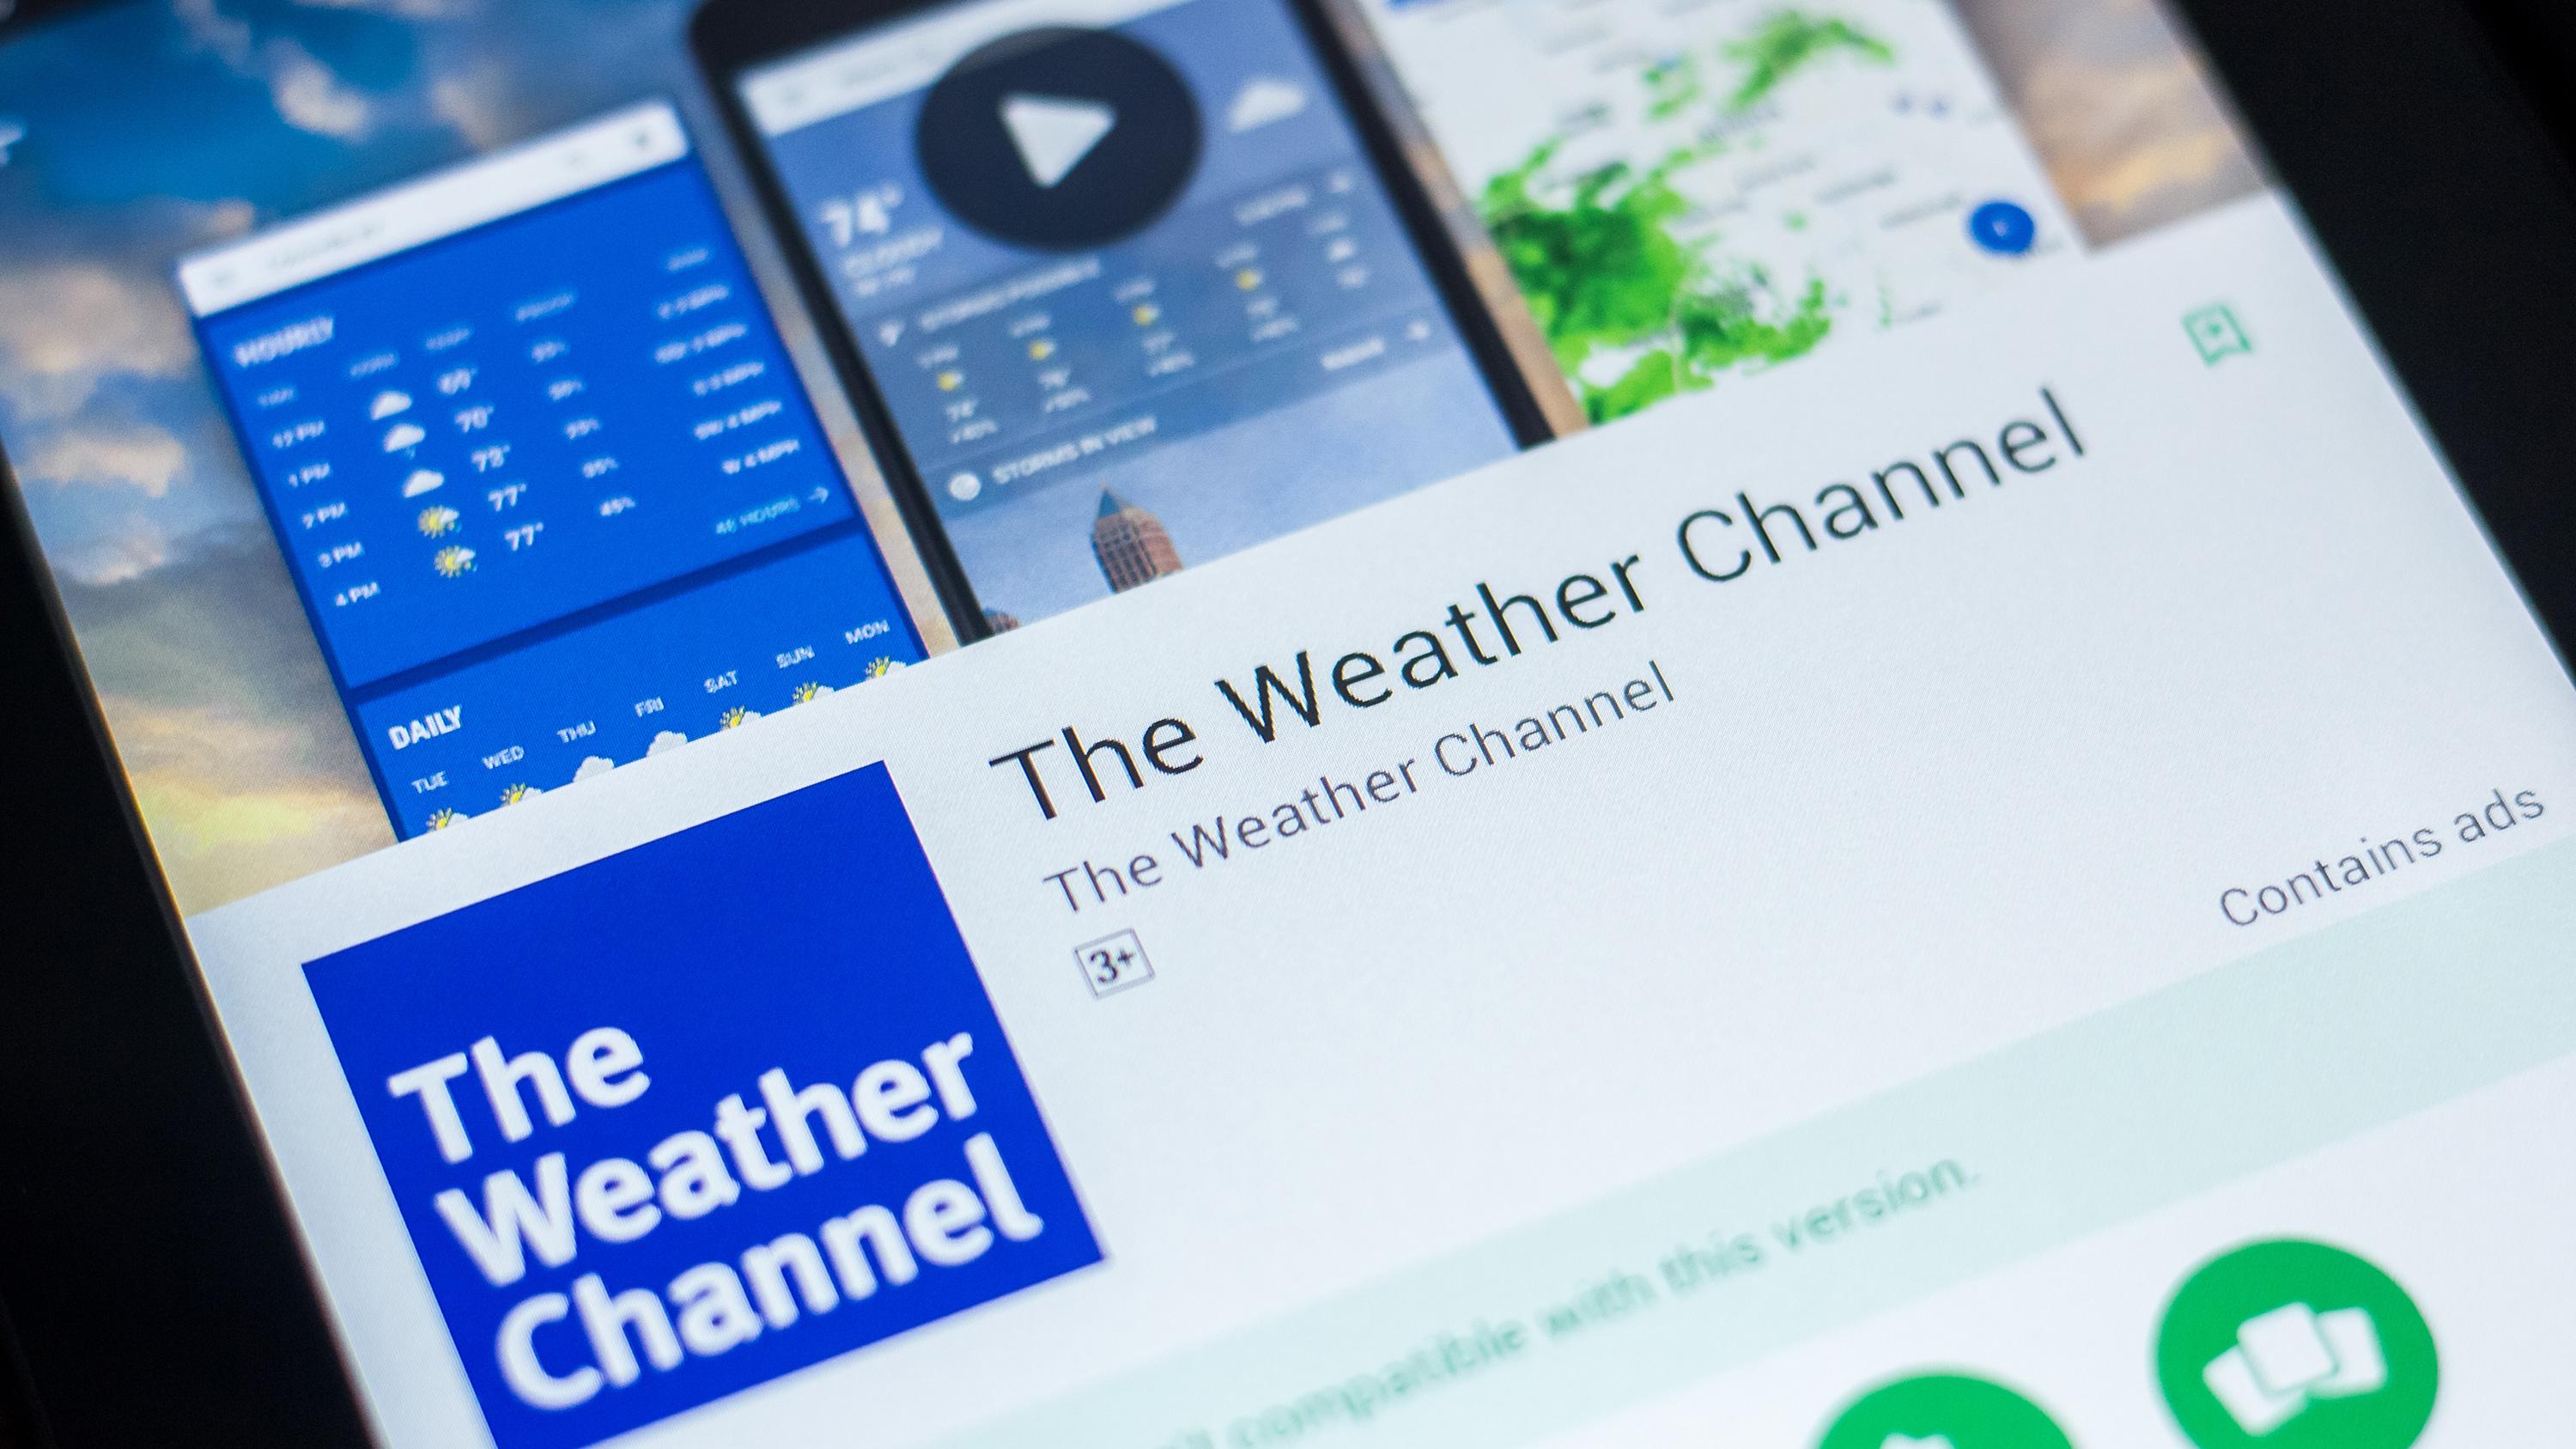 How To Fix The Weather Channel App Not Working?